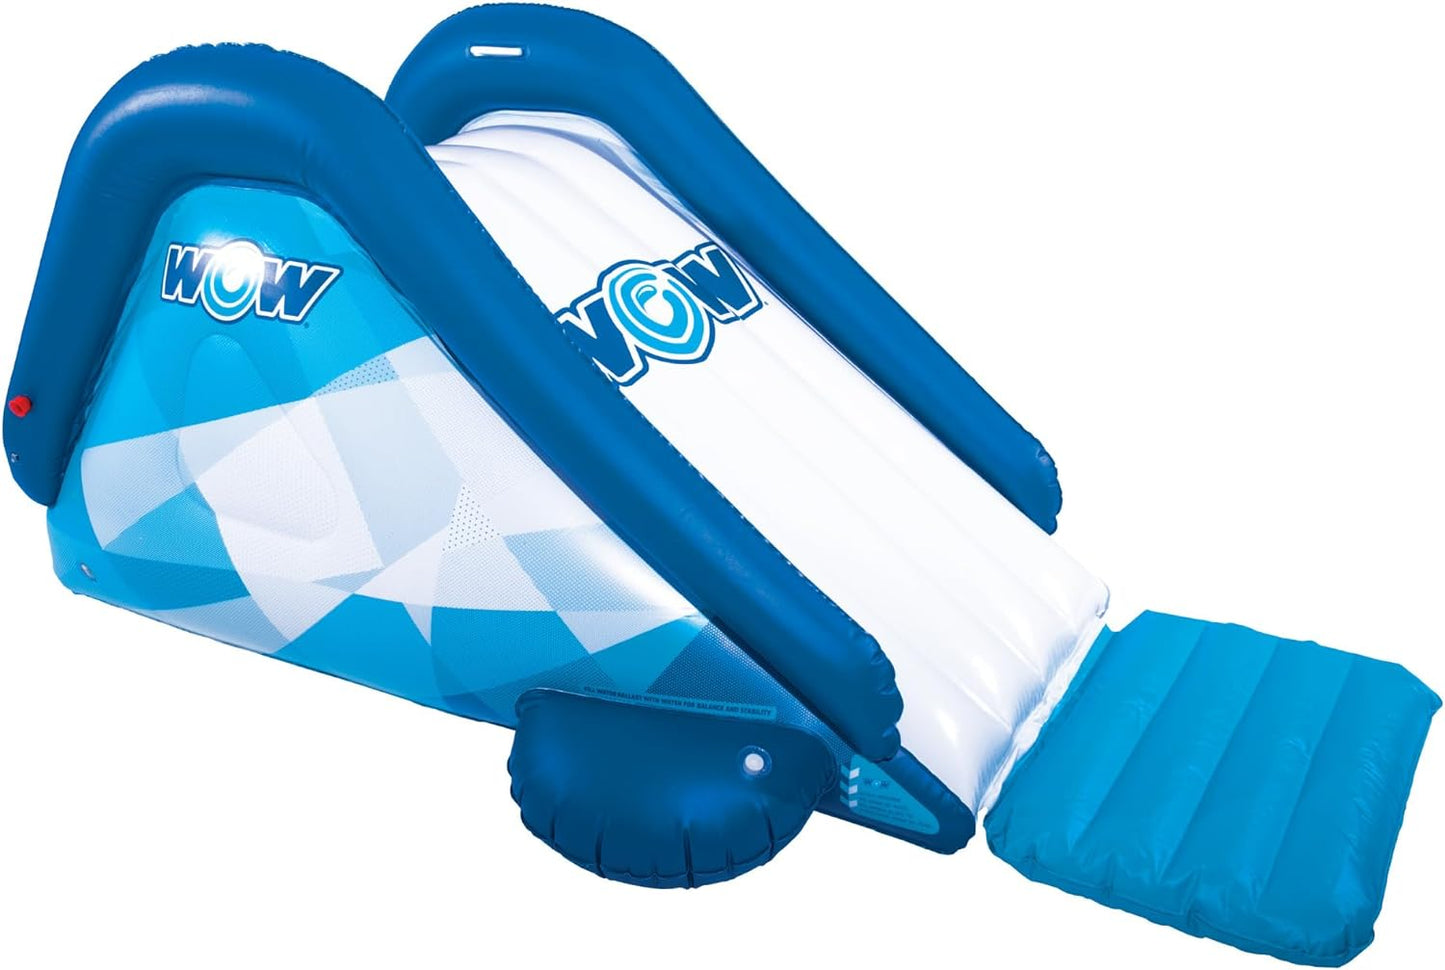 Slide N Smile Slide with 2 Lanes, Giant Floating Water Slide for Adults and Kids